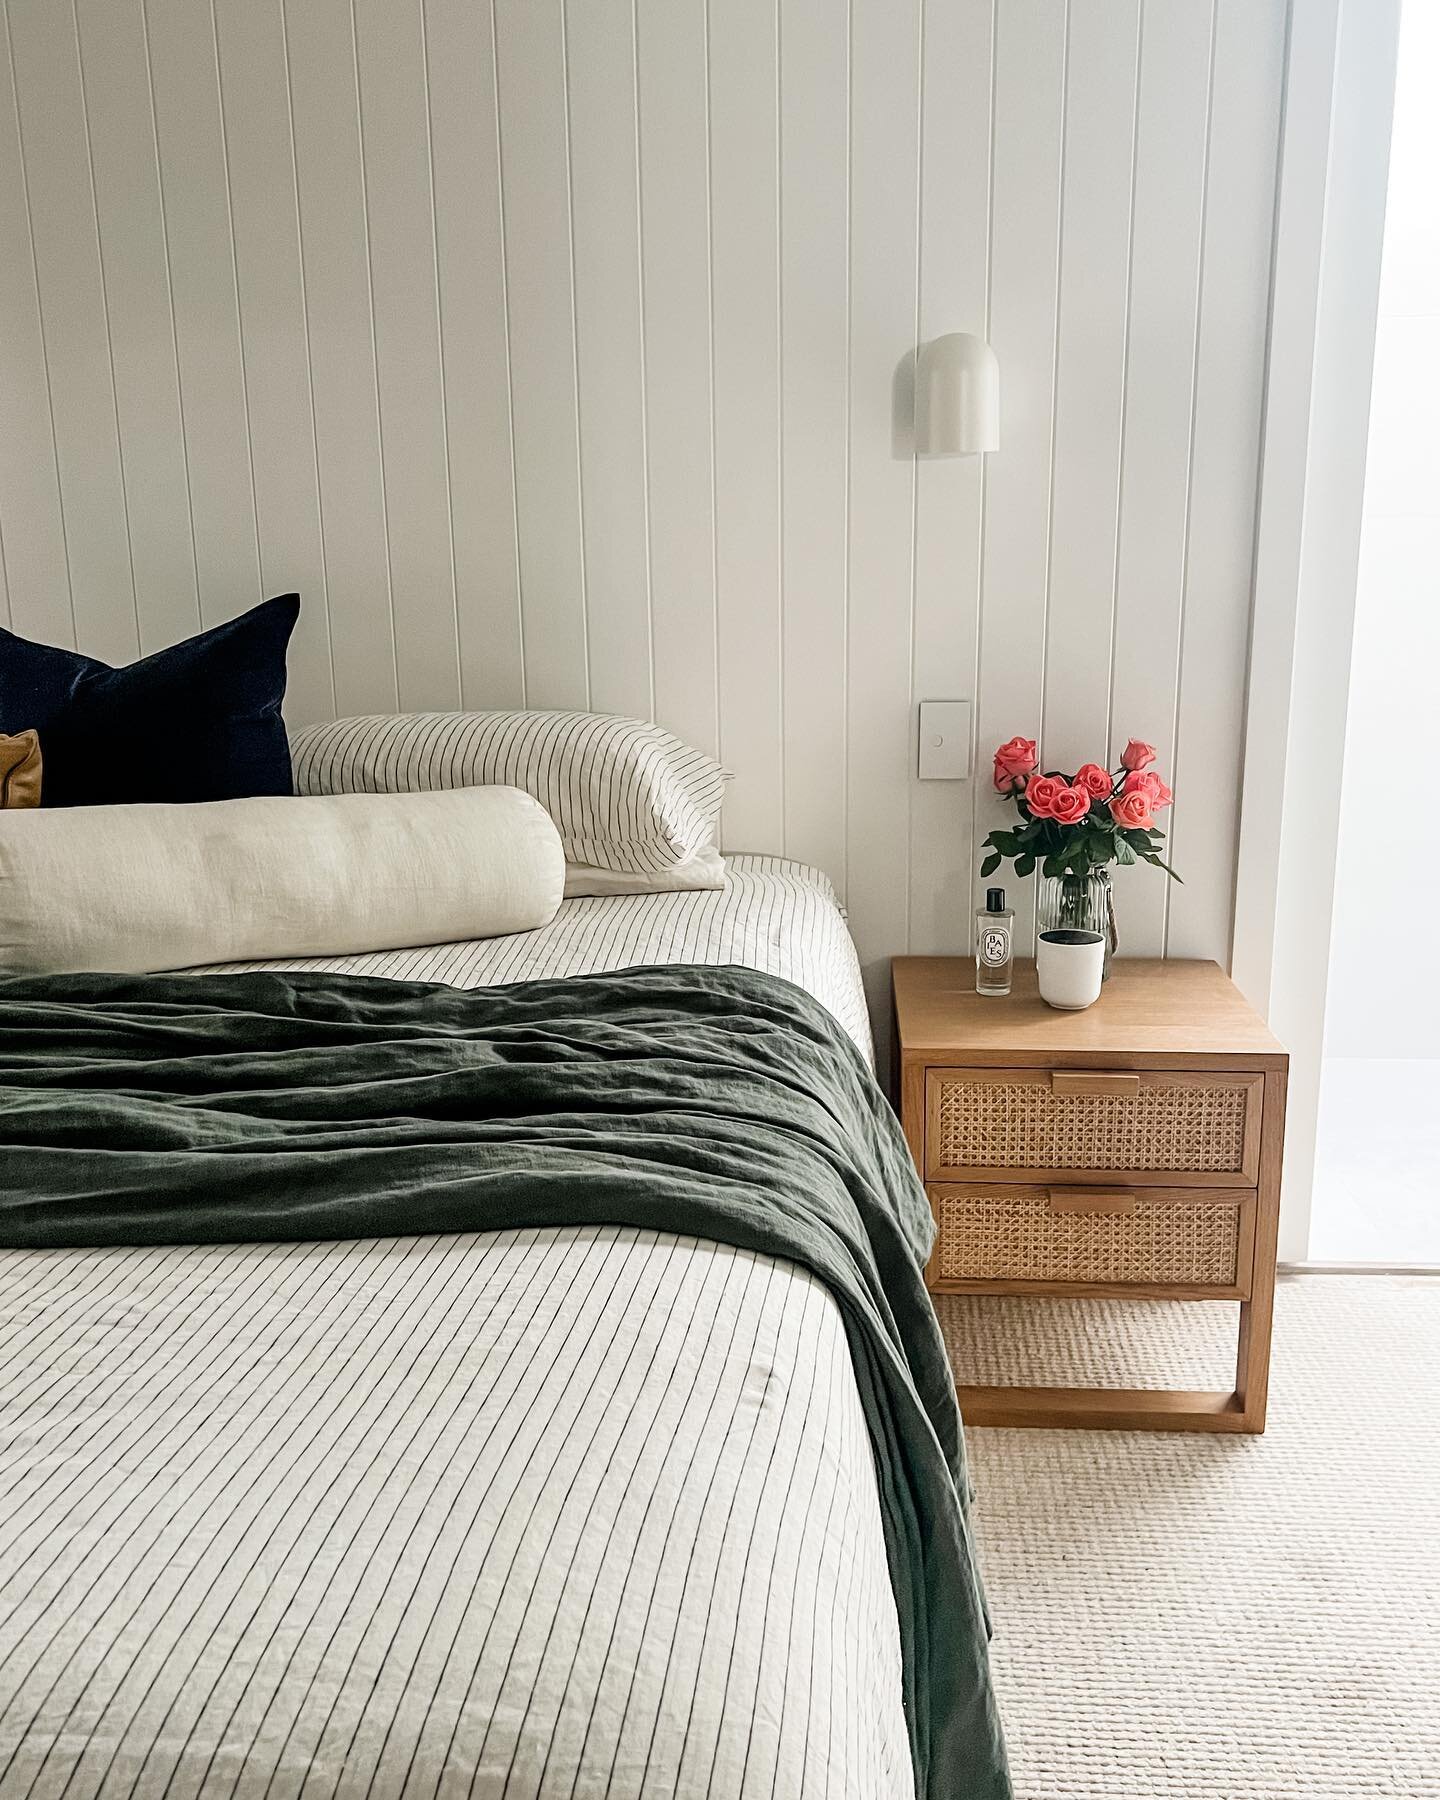 I love a nice bedroom and I love creating bedrooms that are relaxing and soothing spaces 🥰

This bedroom has this and more! Close to the beach, it has just the right hint of coastal (elevated coastal as I like saying!), beautiful textures and privac